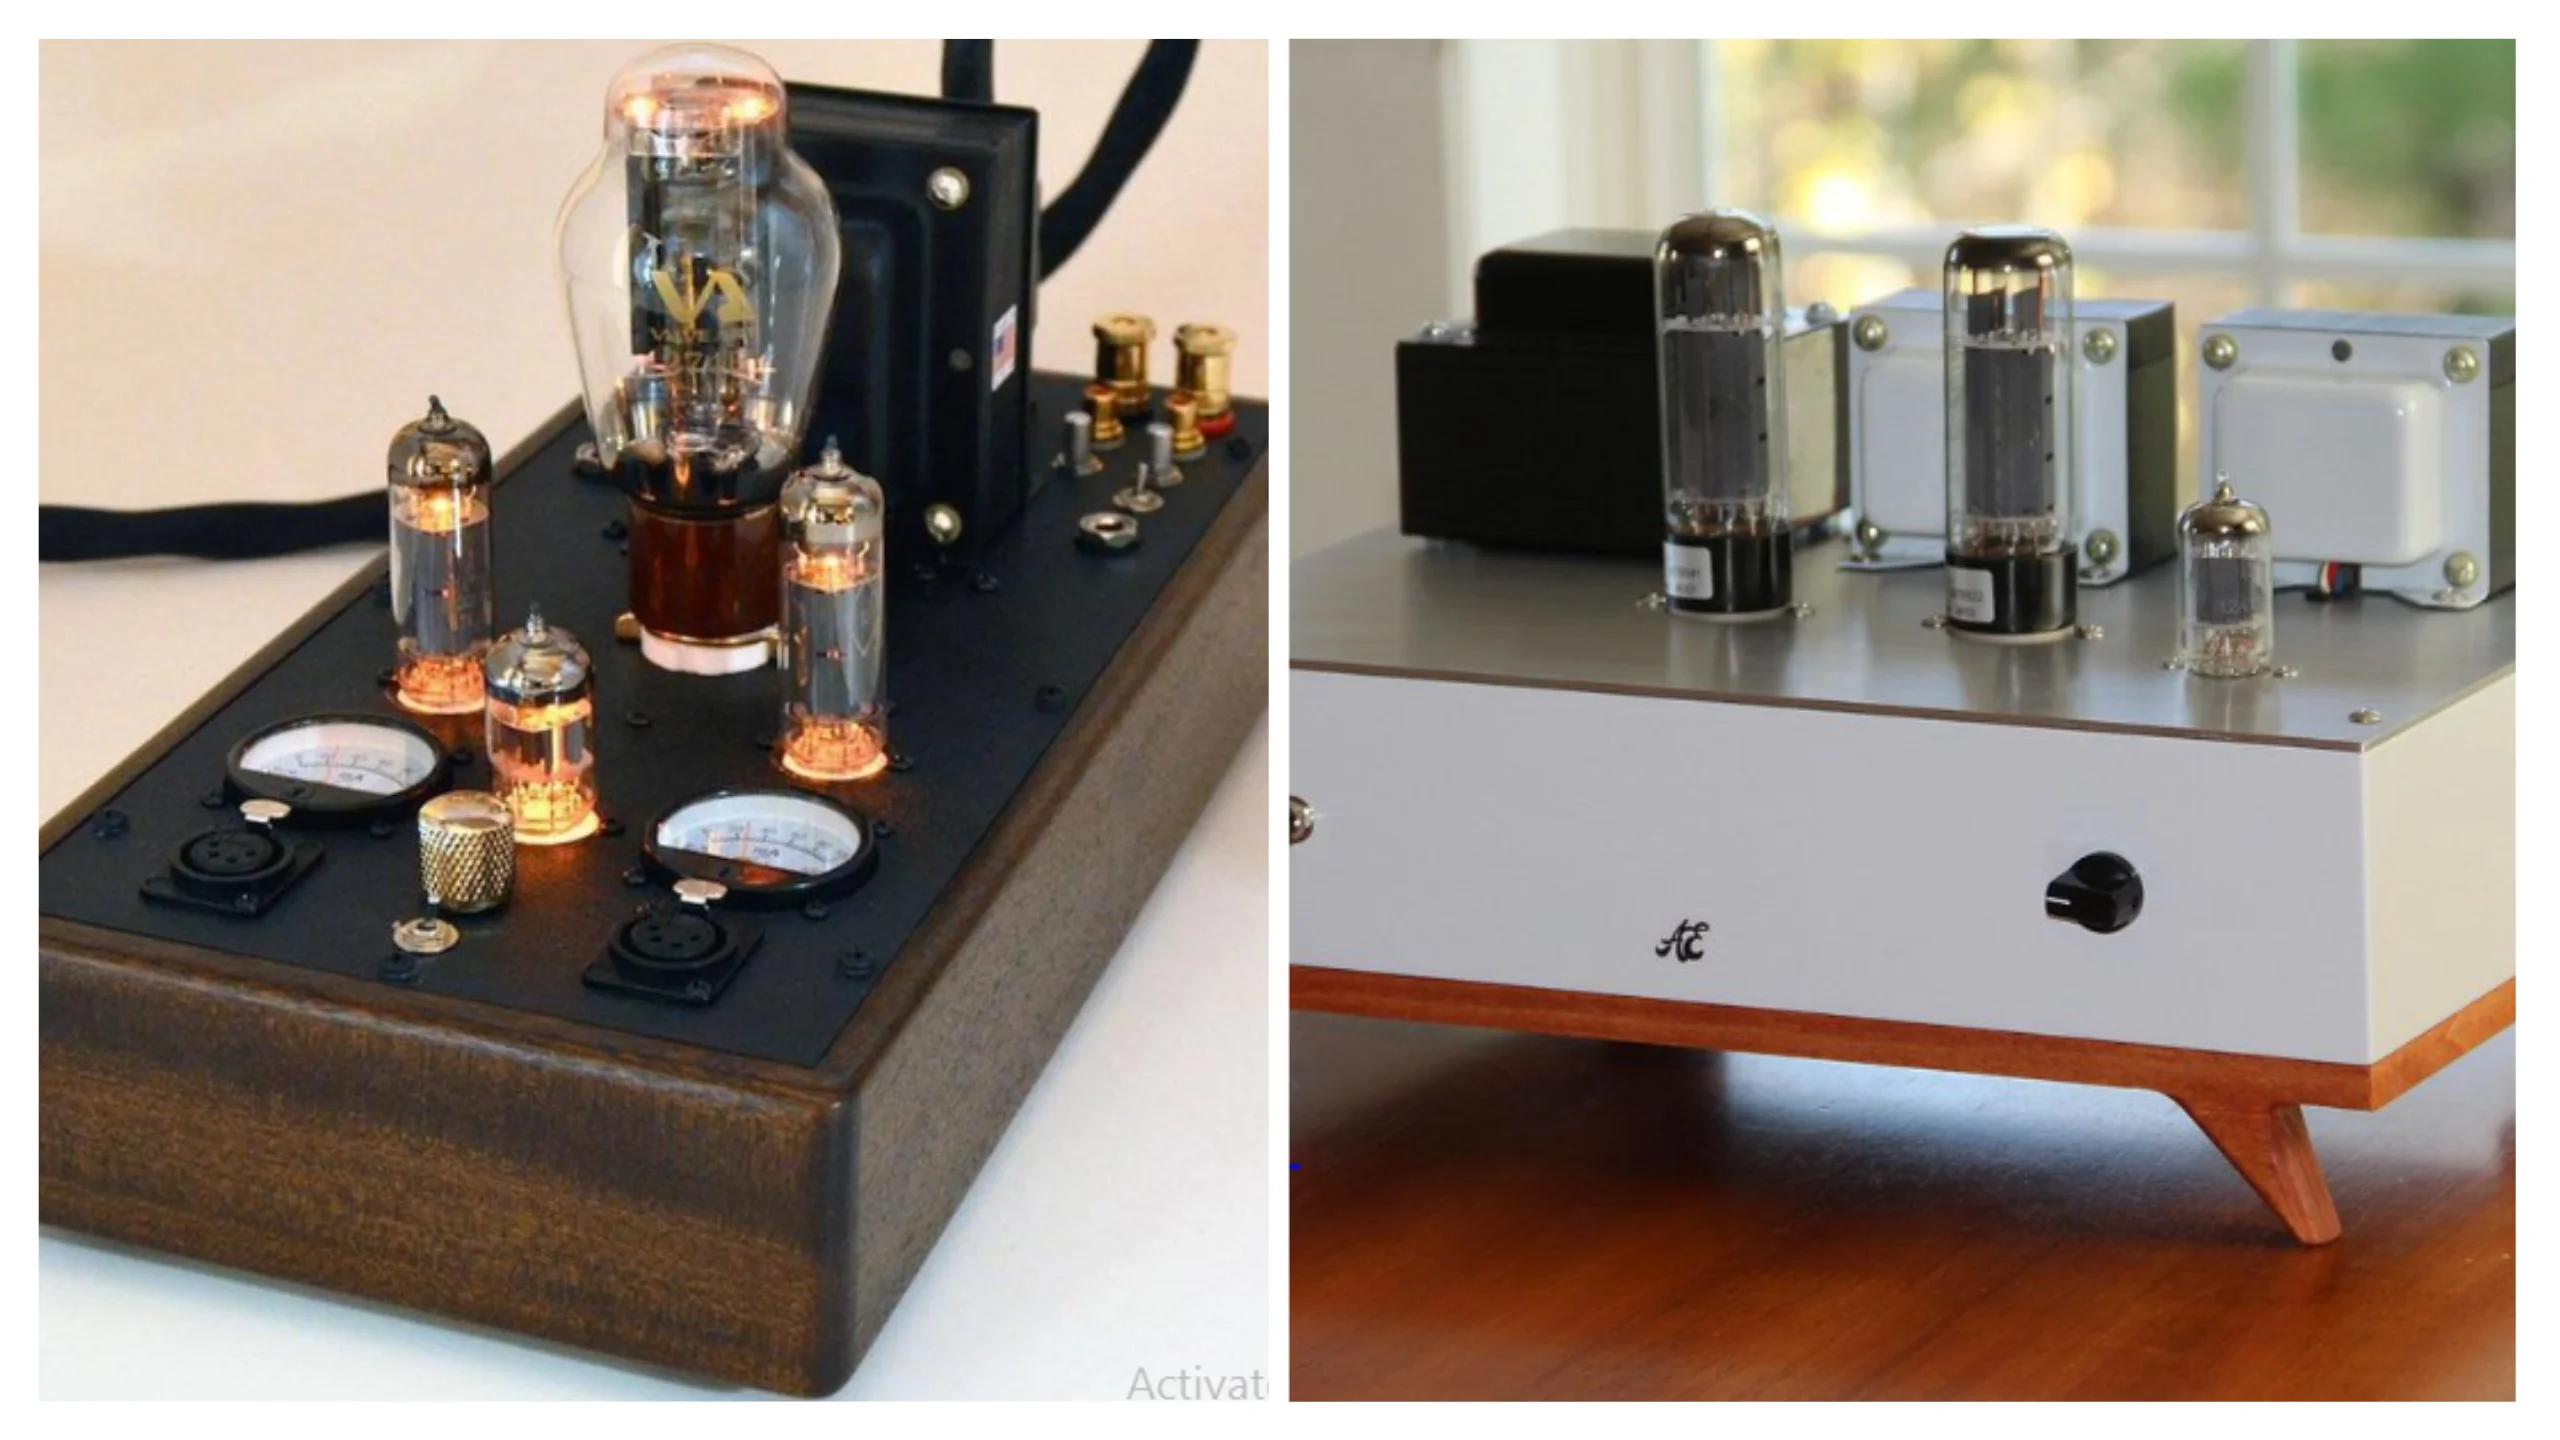 How to build a tube amplifier (1)